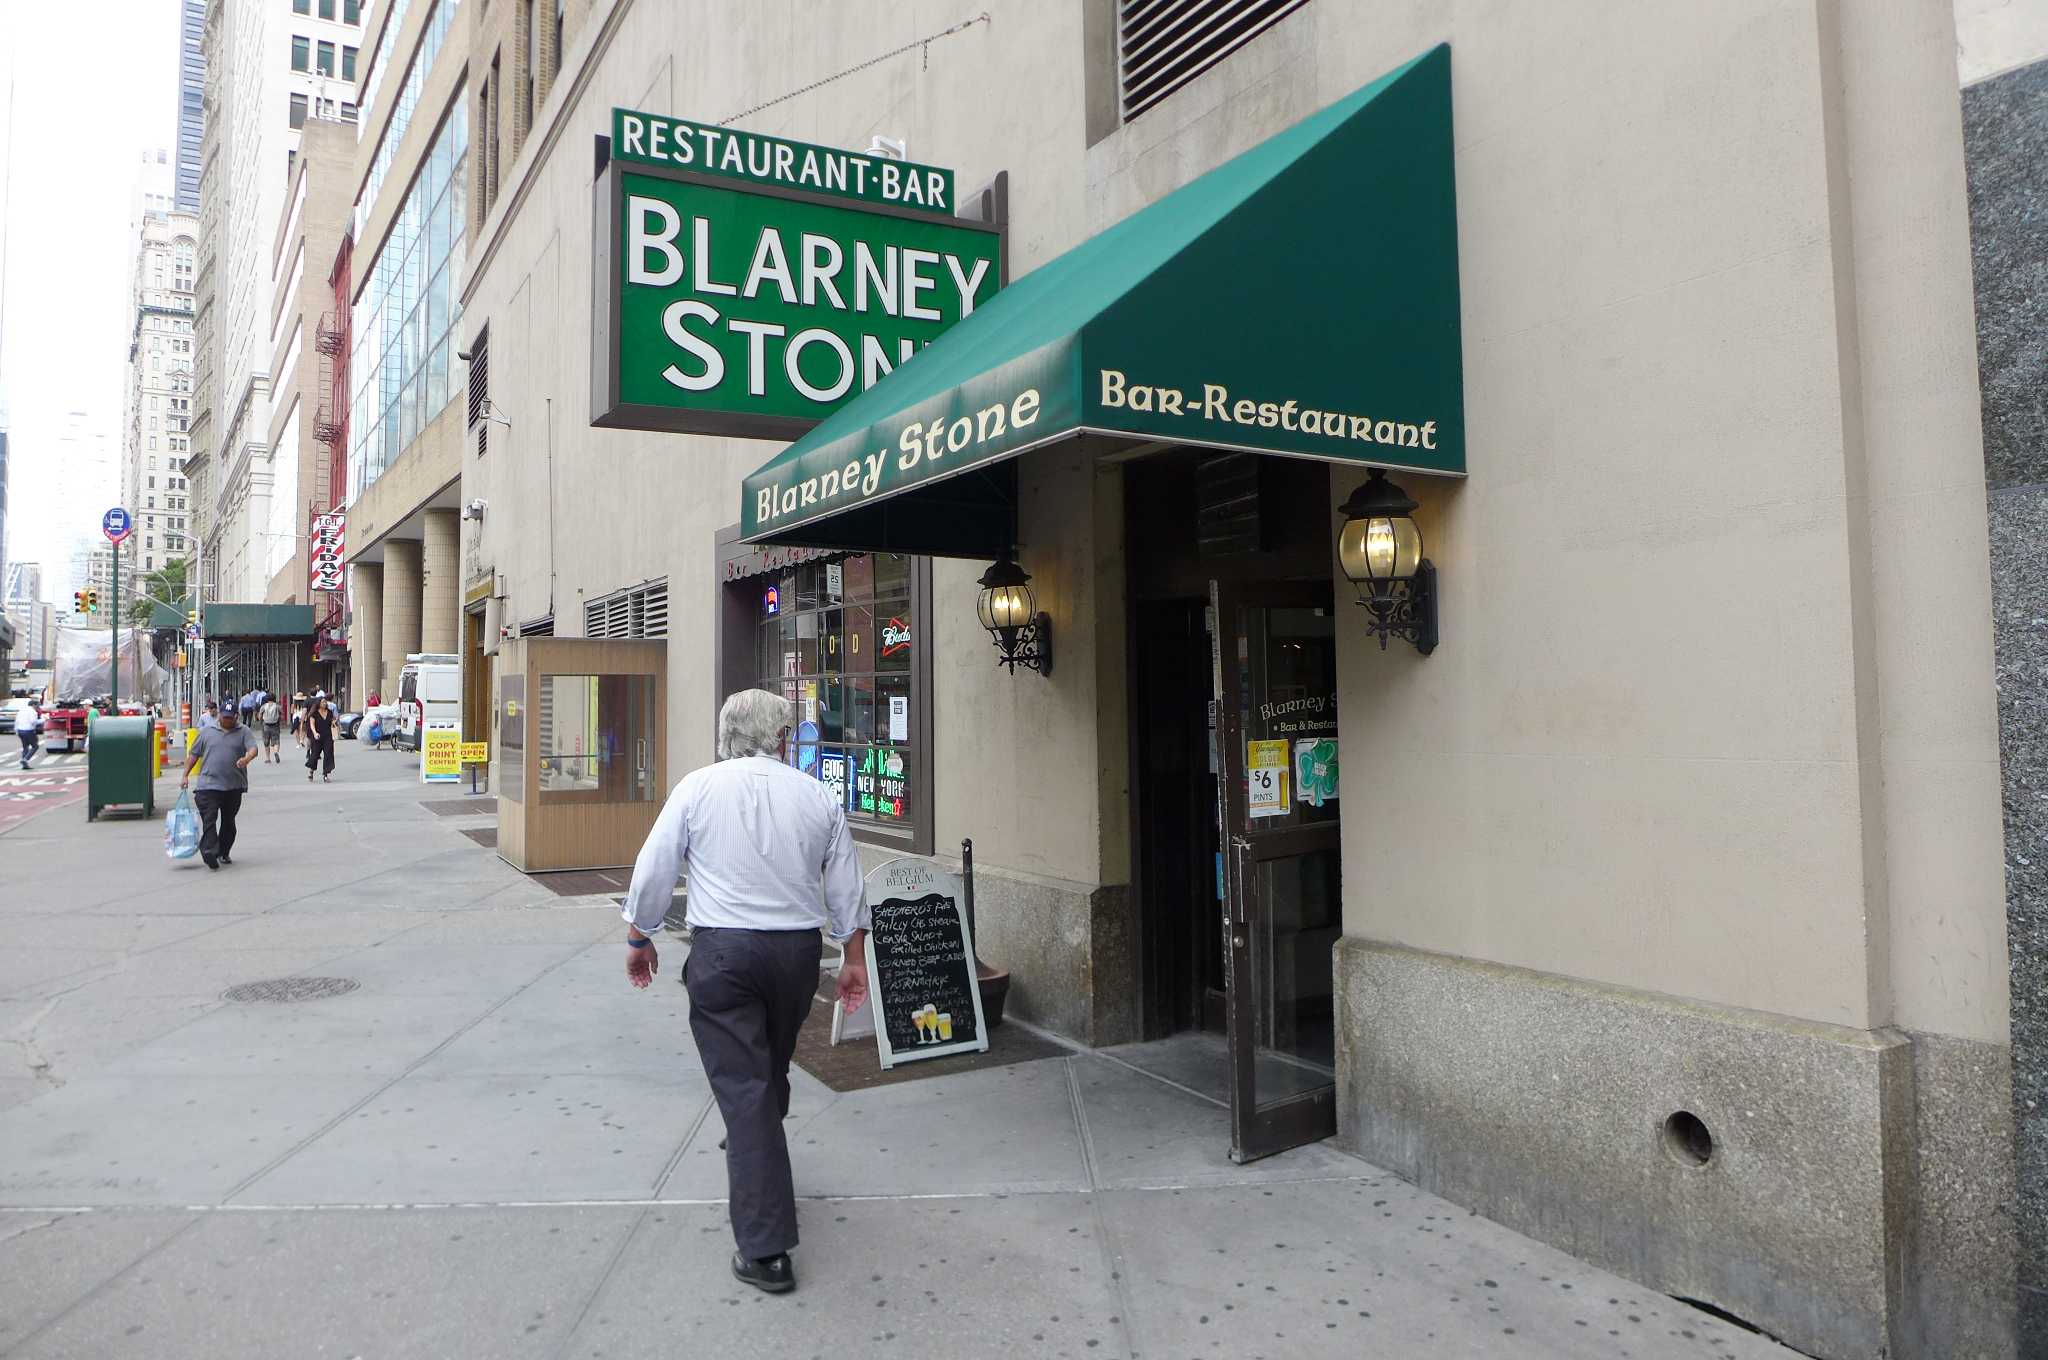 A green awning and green sign that says Blarney Stone, with a man walking away...